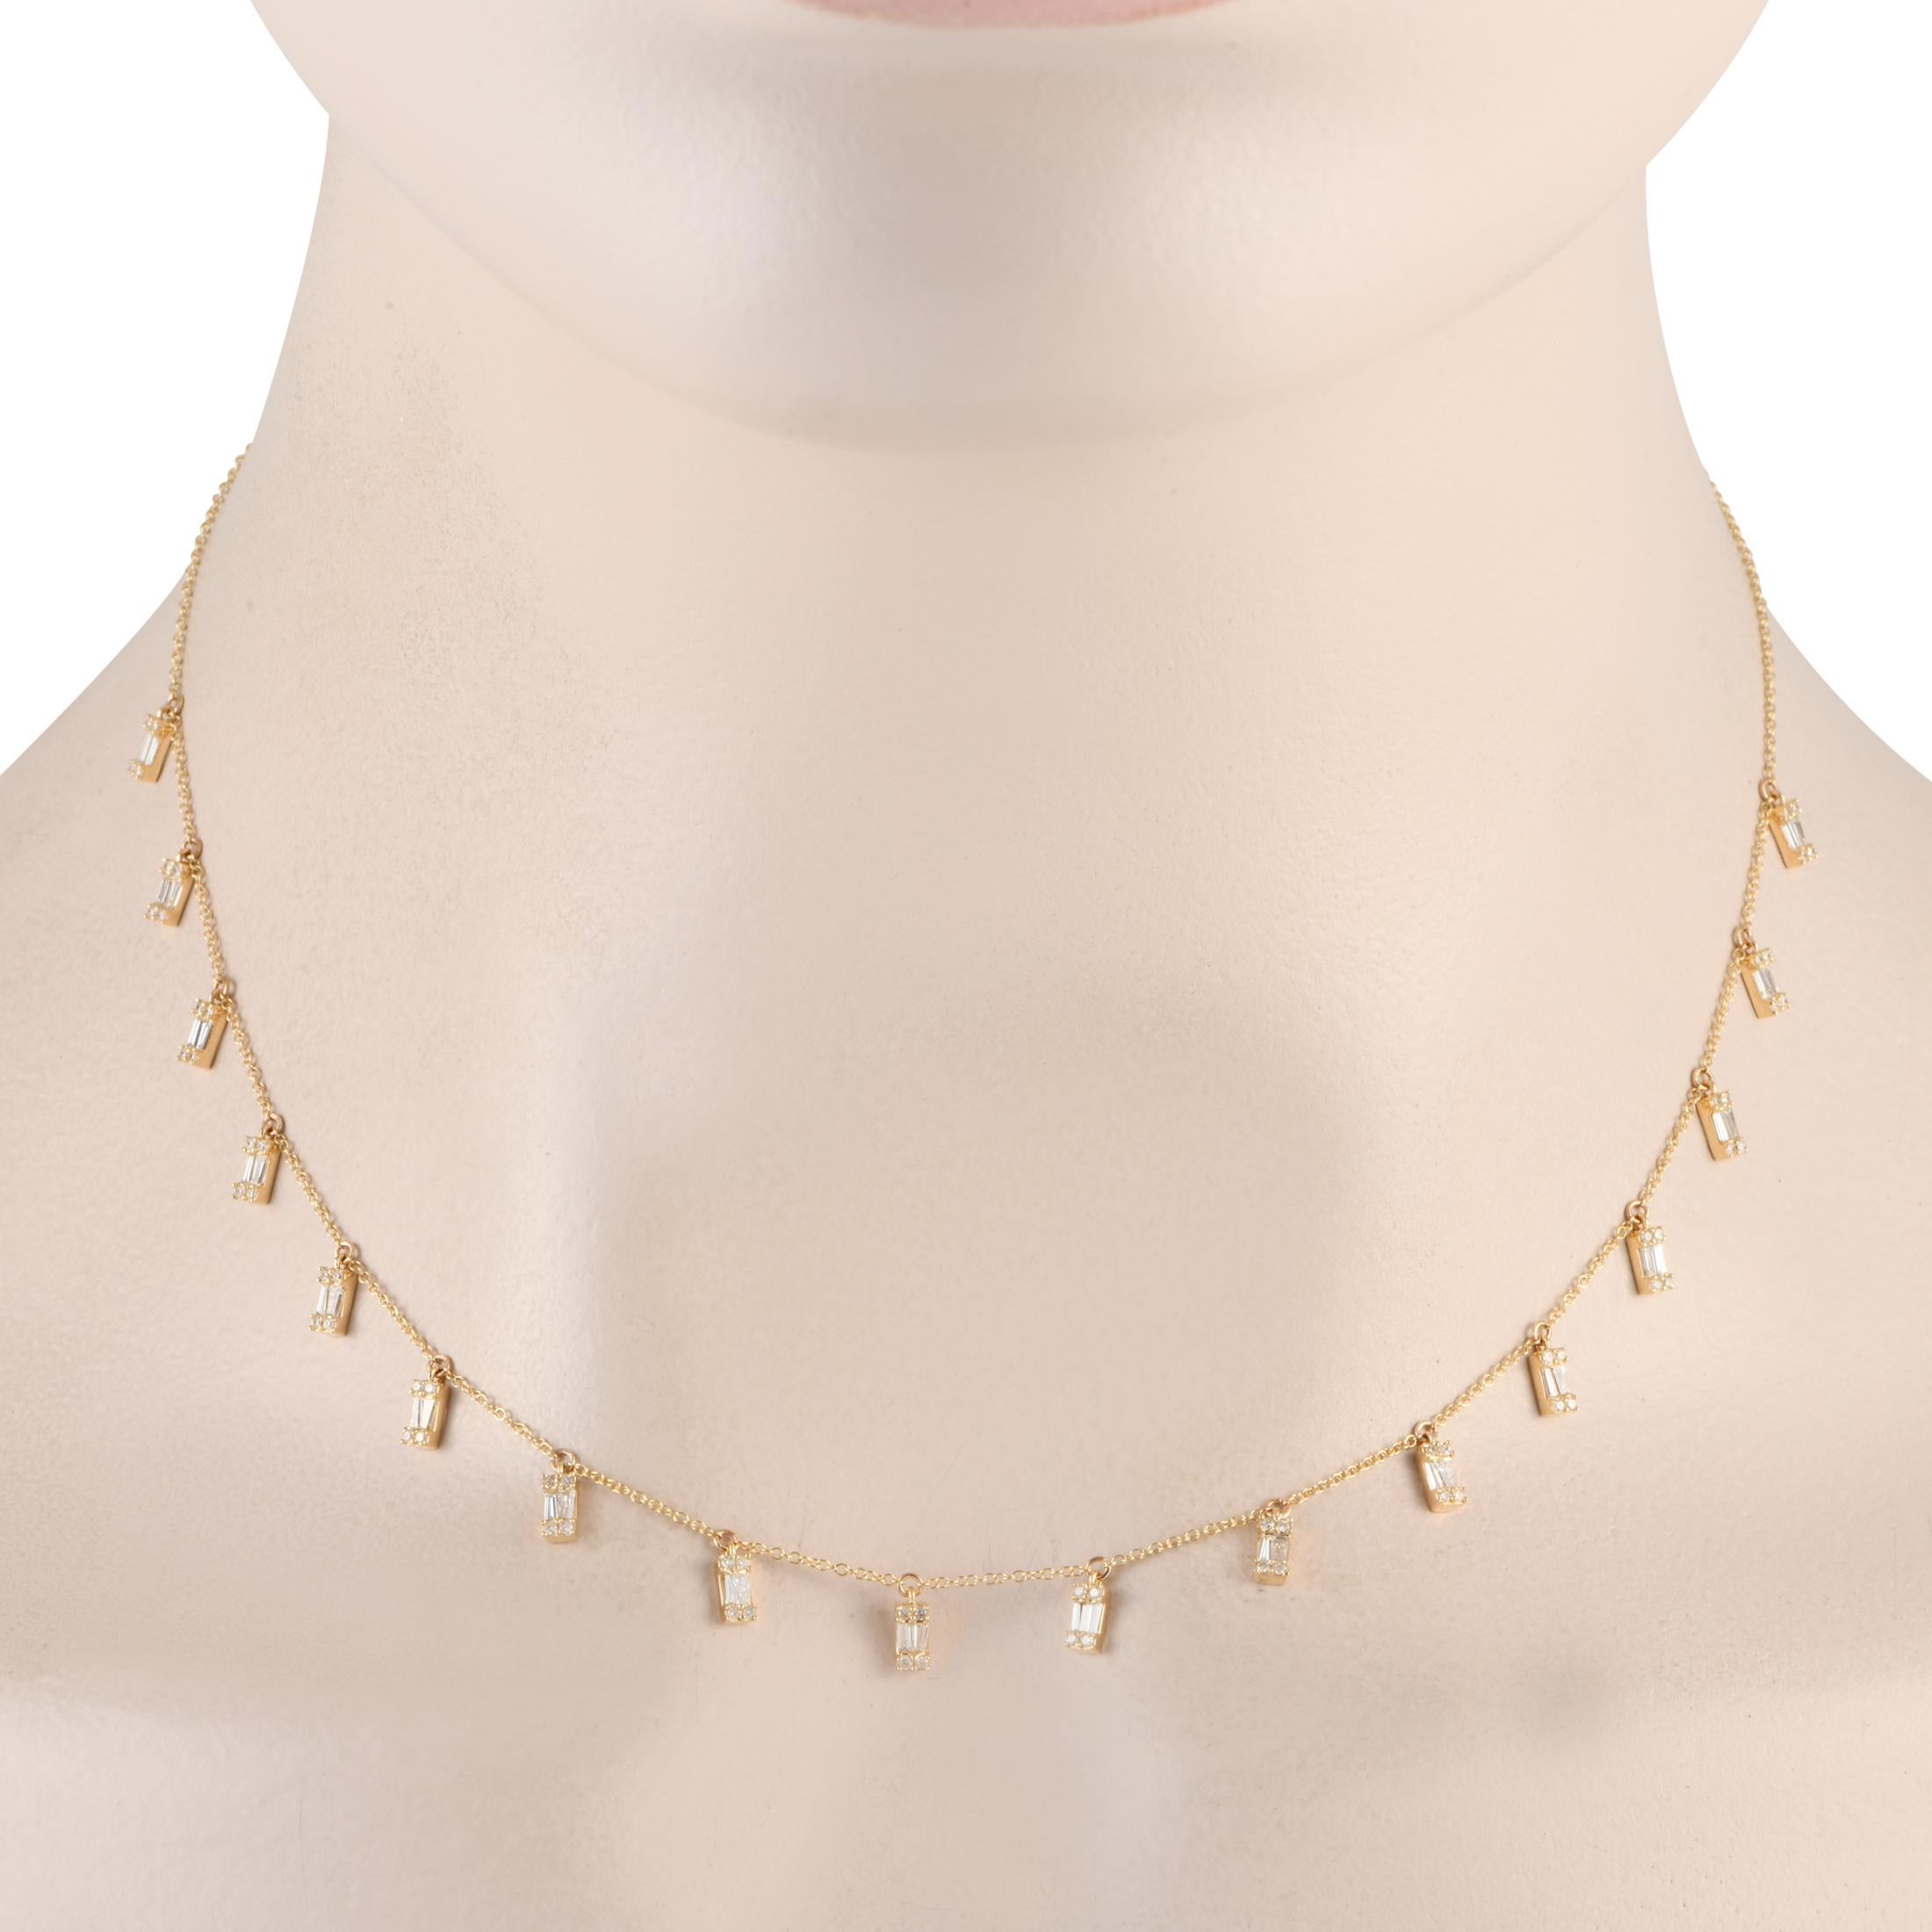 Looking for something sparkly yet understated to add to your daily rotation? This diamond station necklace is an excellent choice. Seventeen diamond-encrusted adornments sit along its 16-inch-long chain. Each tiny bar-shaped embellishment or pendant